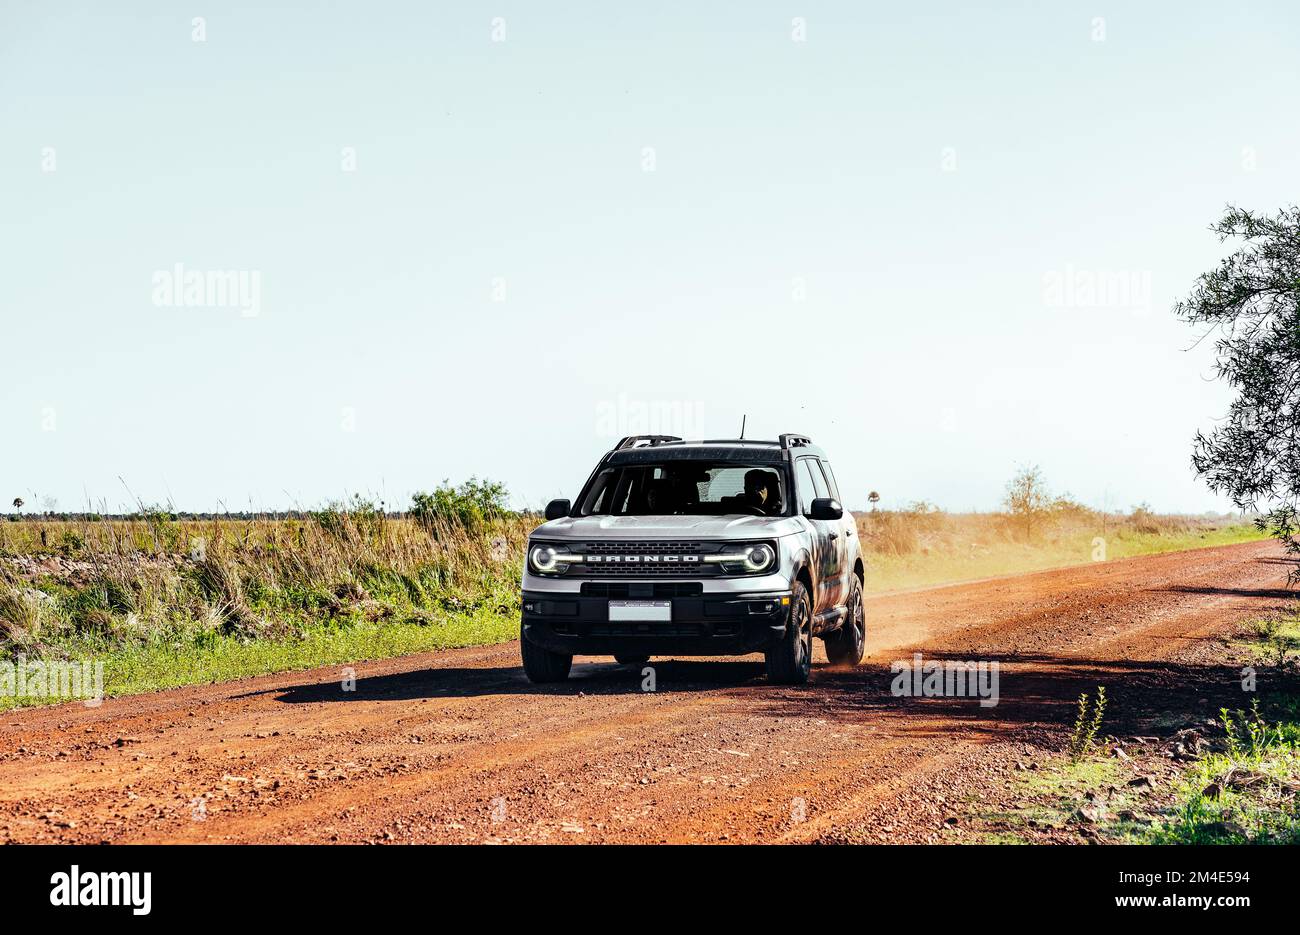 COLONIA CARLOS PELLEGRINI, CORRIENTES, ARGENTINA - NOVEMBER 19, 2021: SUV car drives in the gravel road that join the city of Mercedes and the small t Stock Photo